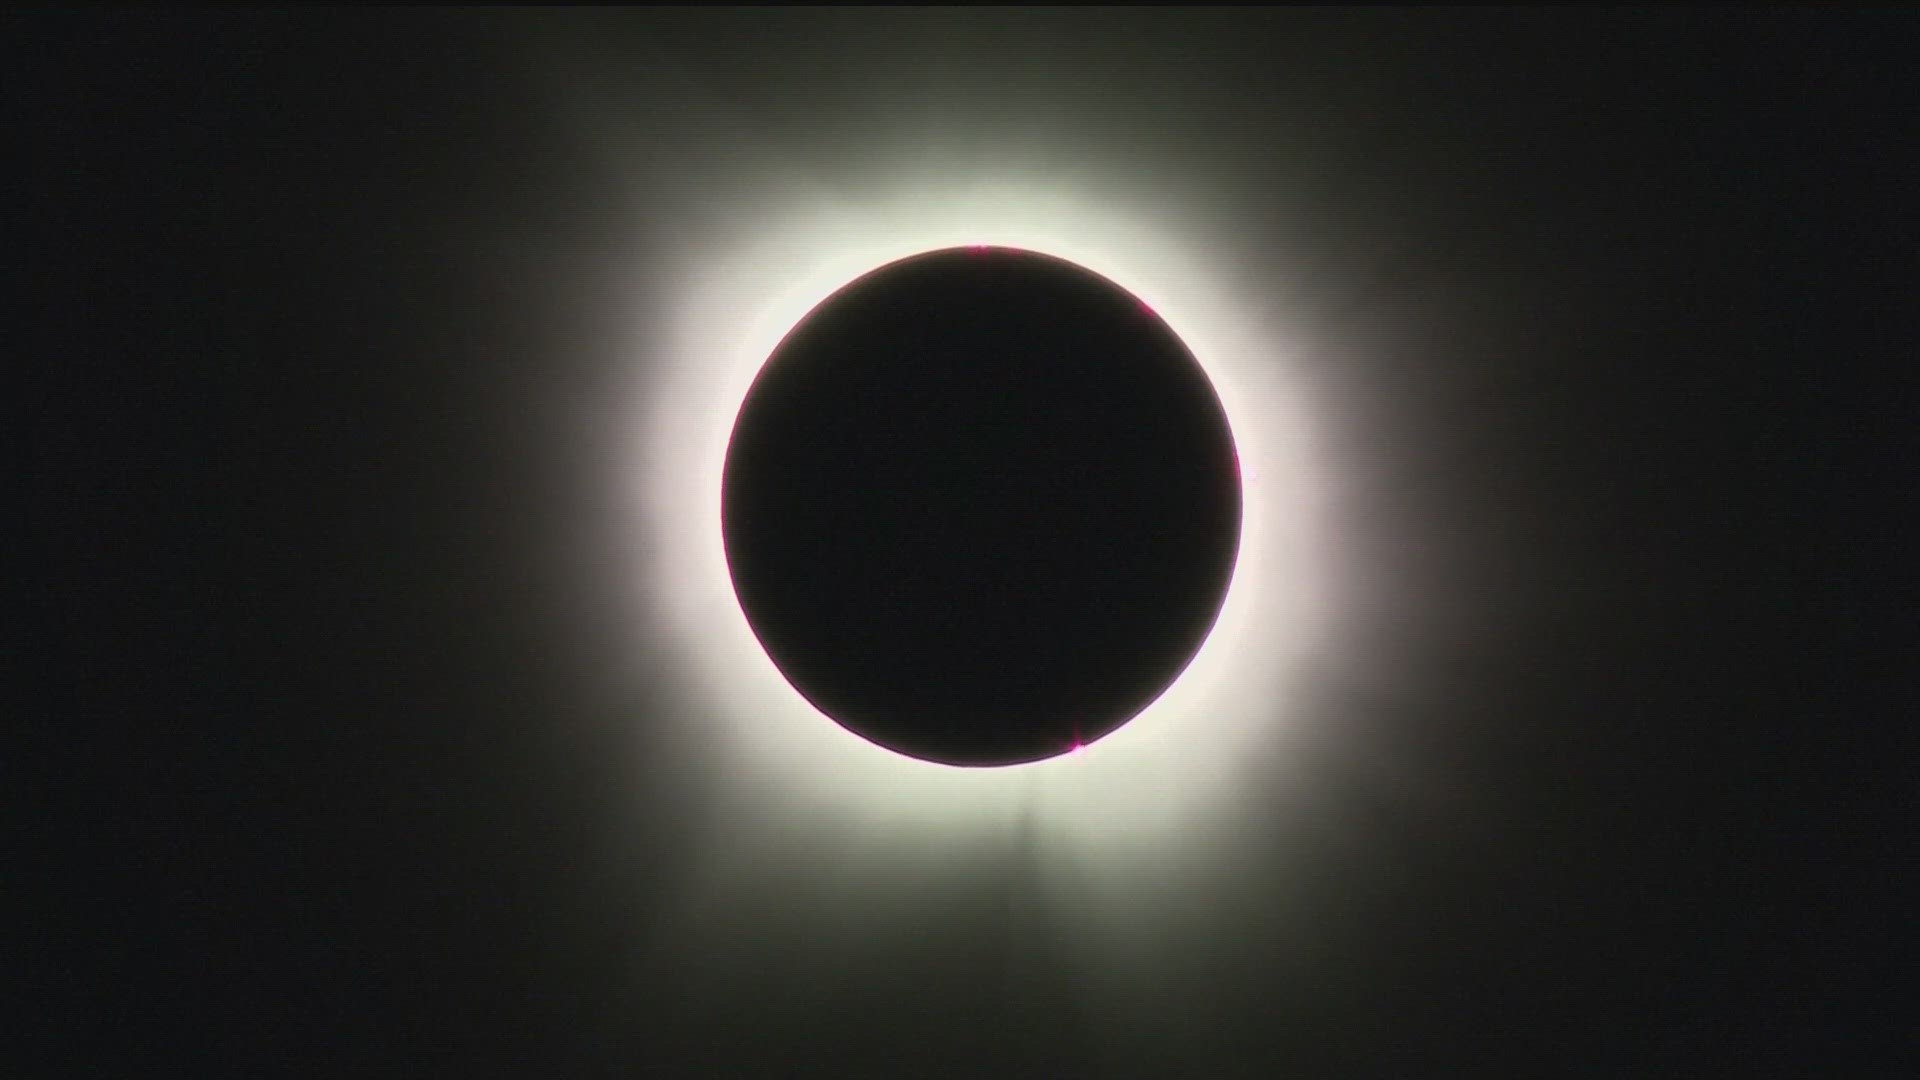 NASA shares moments across the country from the 2024 solar eclipse.